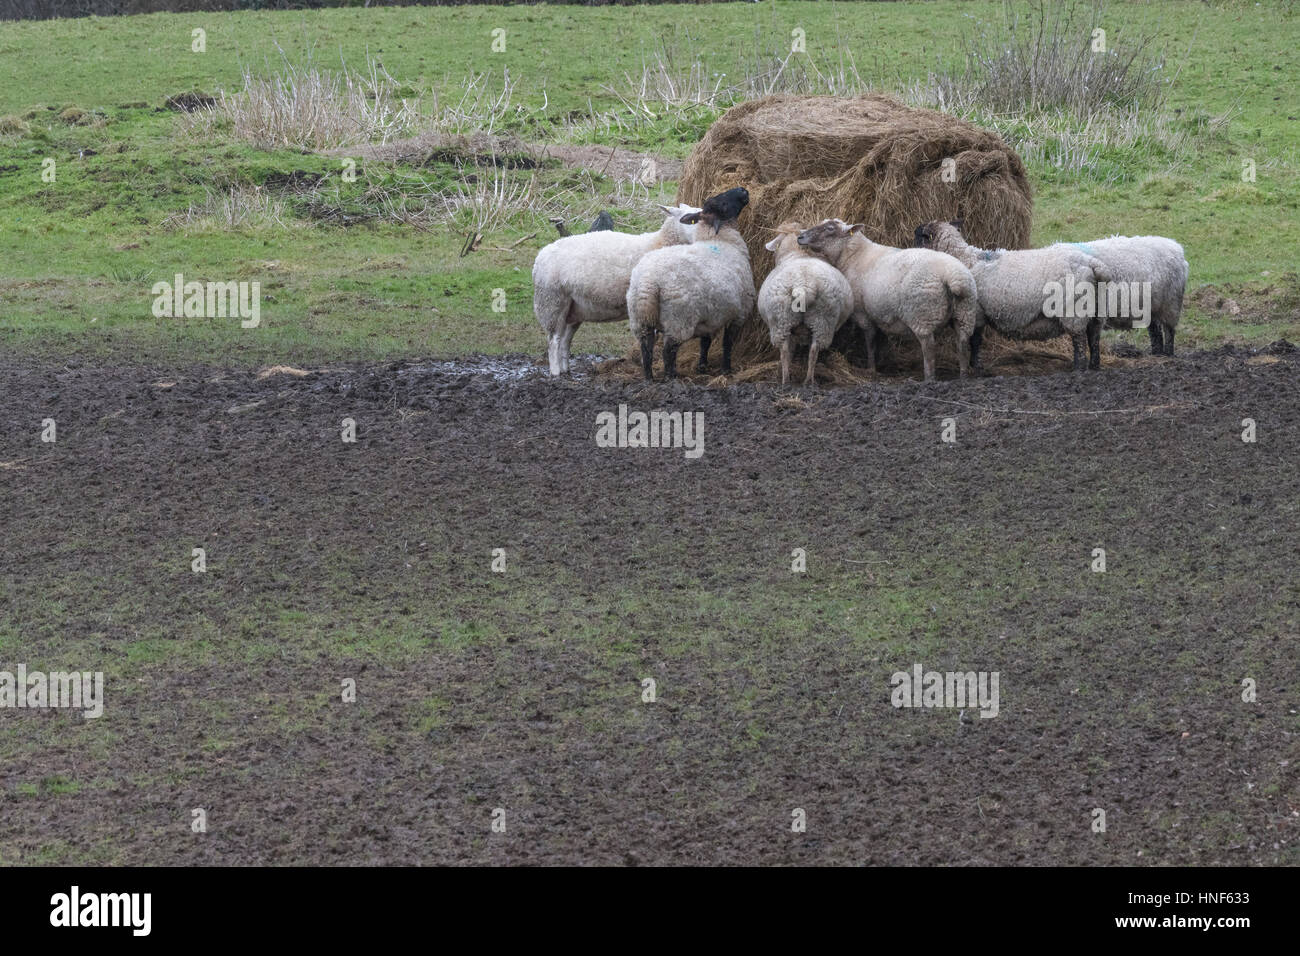 Sheep feeding from pile of supplied fodder during winter months. Parody for concept of 'group think', and herd mentality, livestock farming UK. Stock Photo